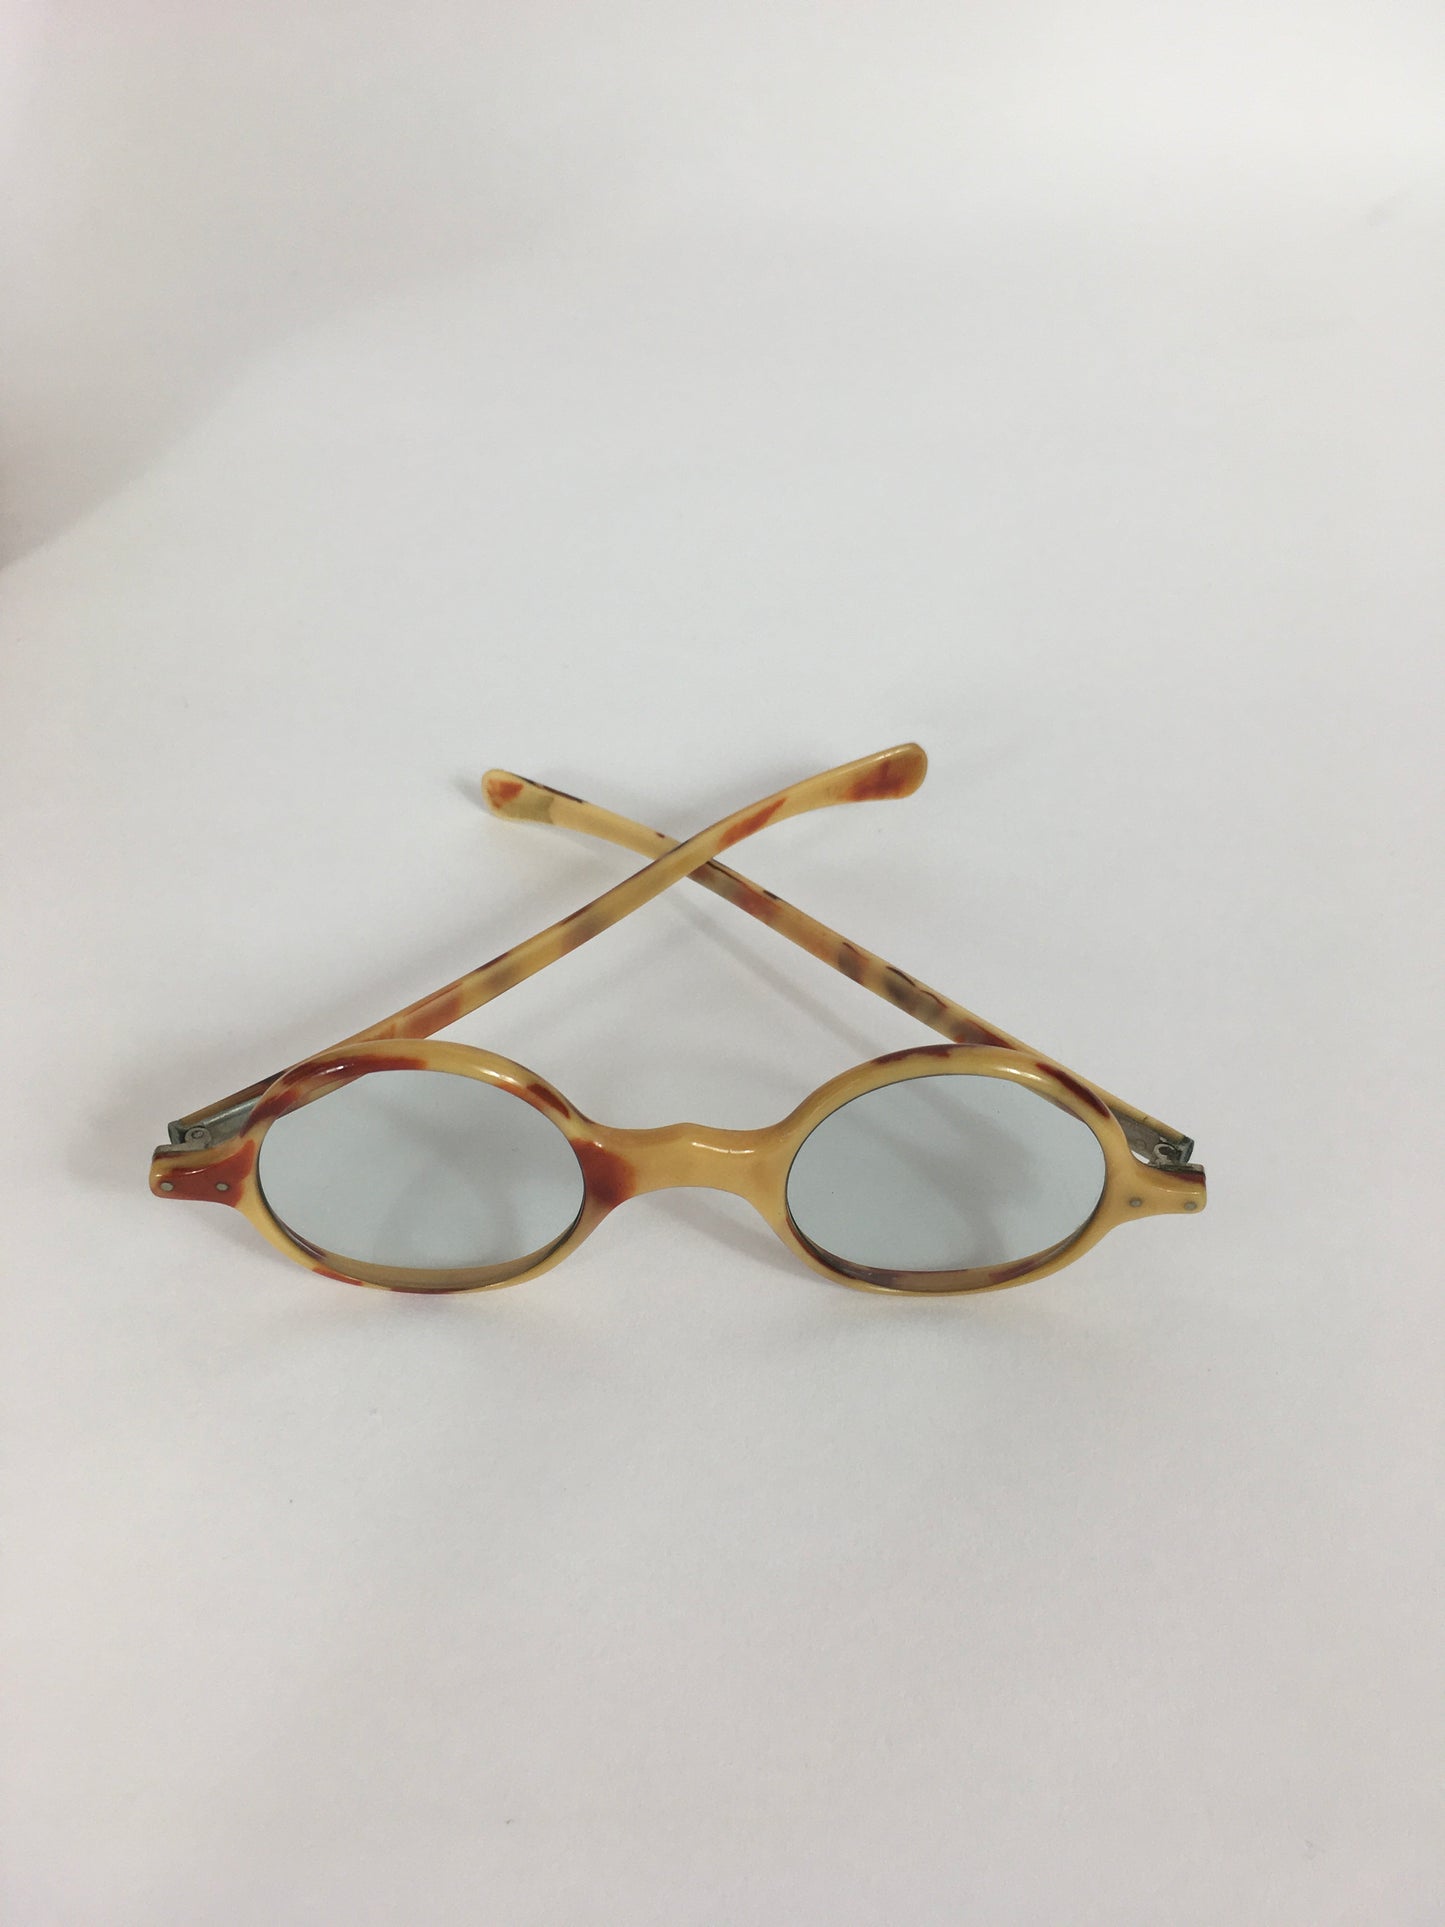 Original 1930s Sunglasses - In a Lovely Cream and Brown 2 Tone in a Small Classic Frame